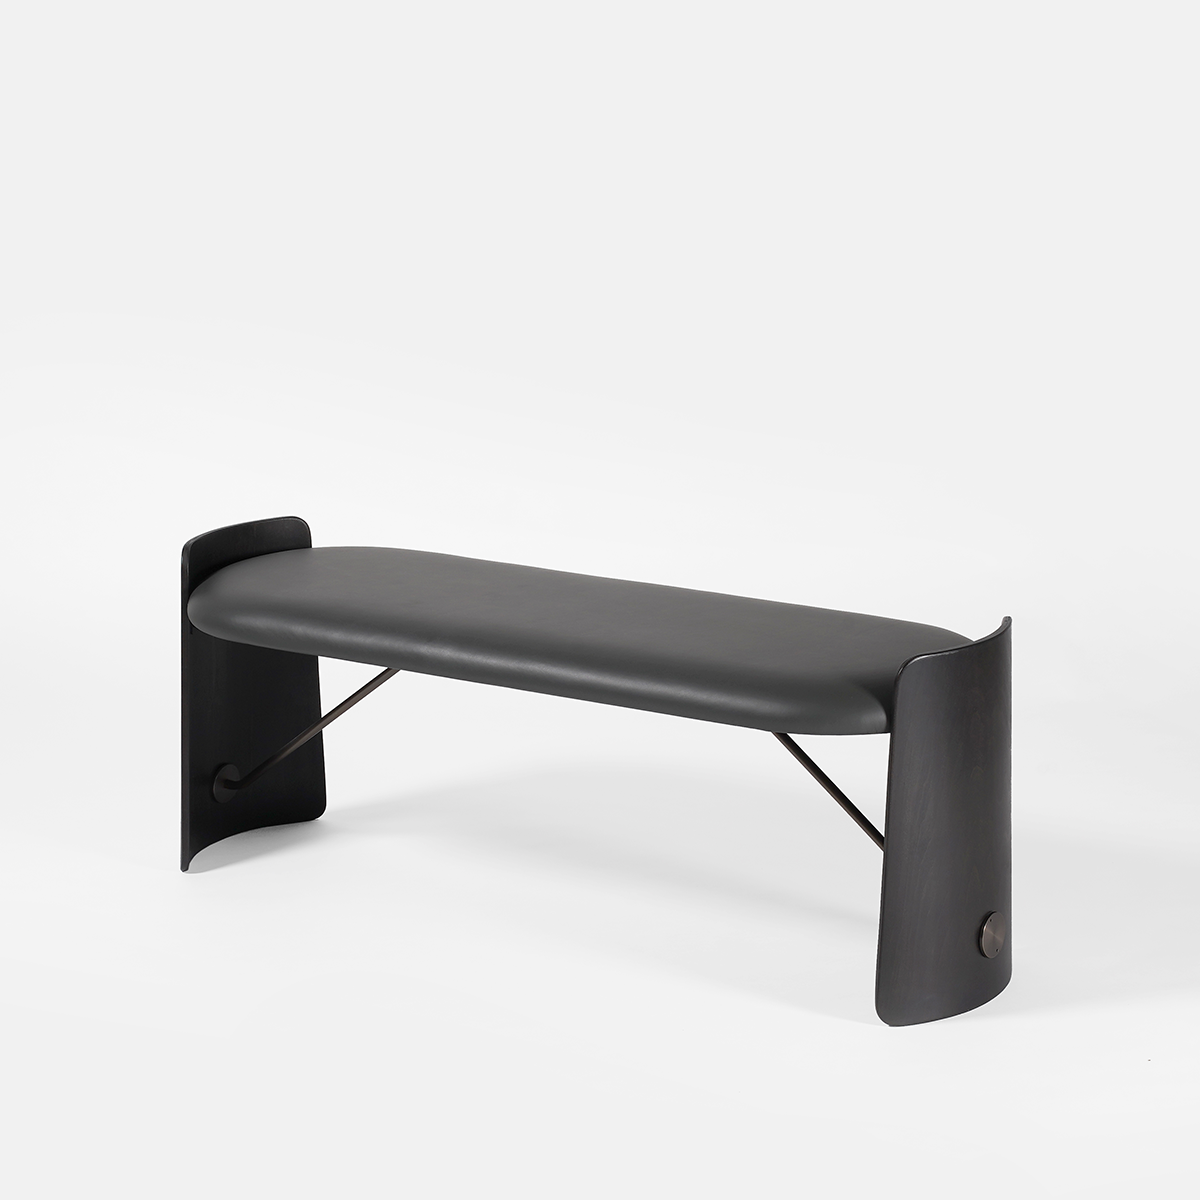 Biscotto bench in grey by Christophe de la Fontaine DANTE - Goods and Bads